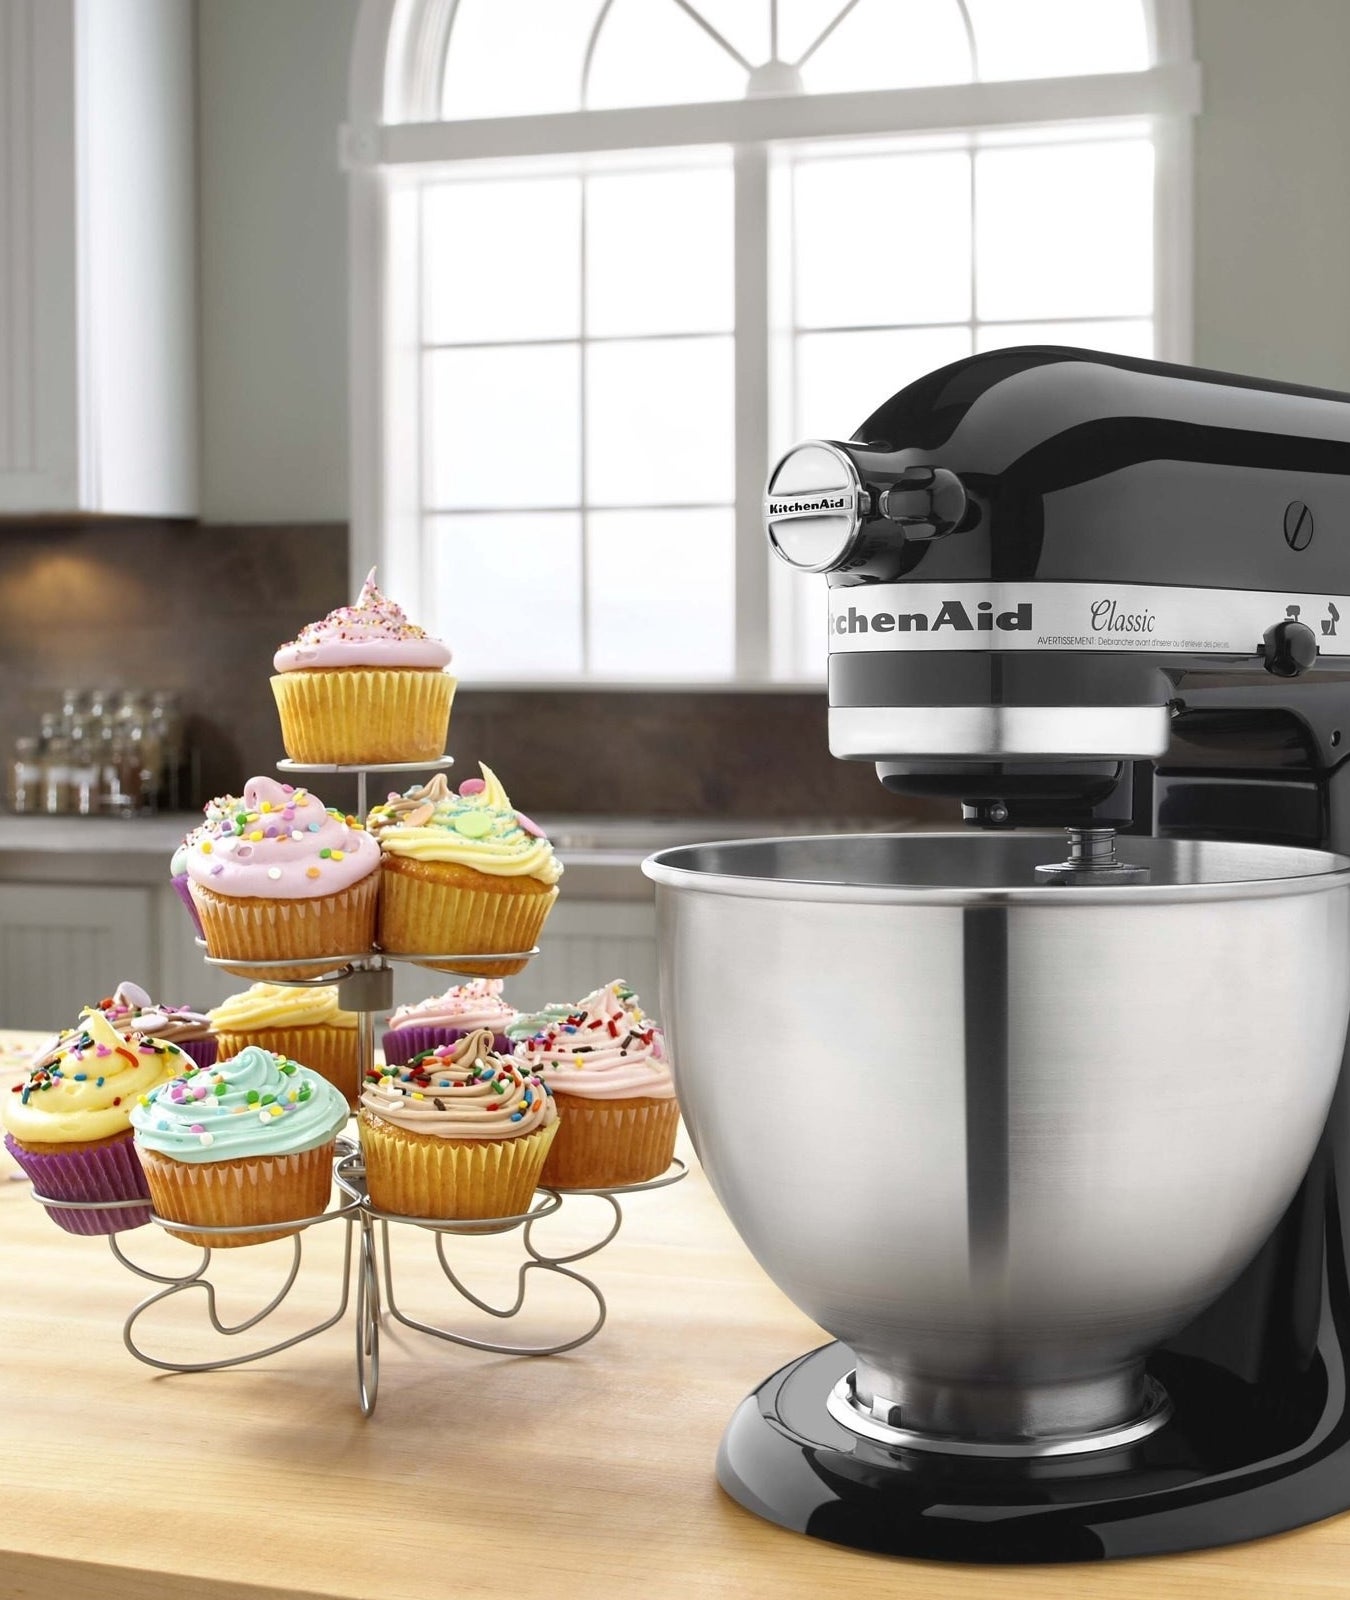 The KitchenAid mixer with a large bowl on a kitchen counter